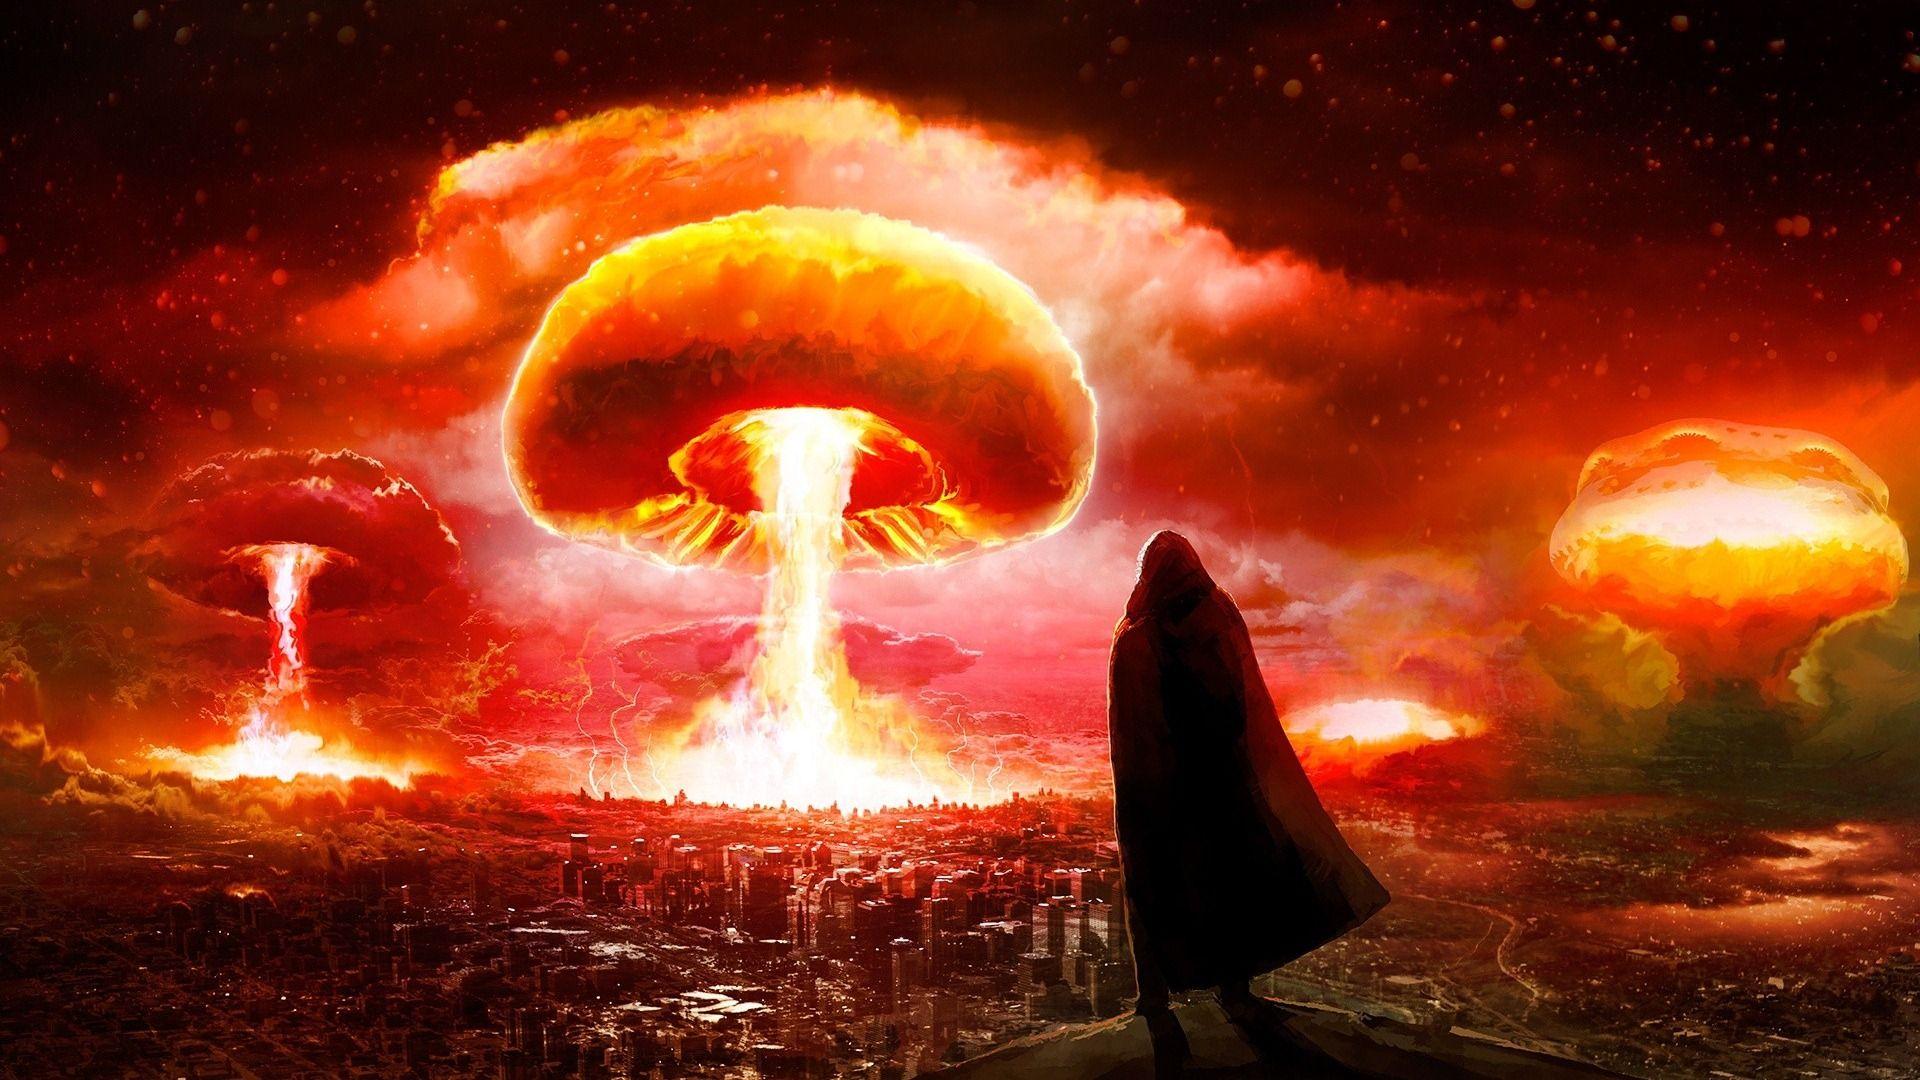 Nuclear Bomb Explosion Wallpaper 12503